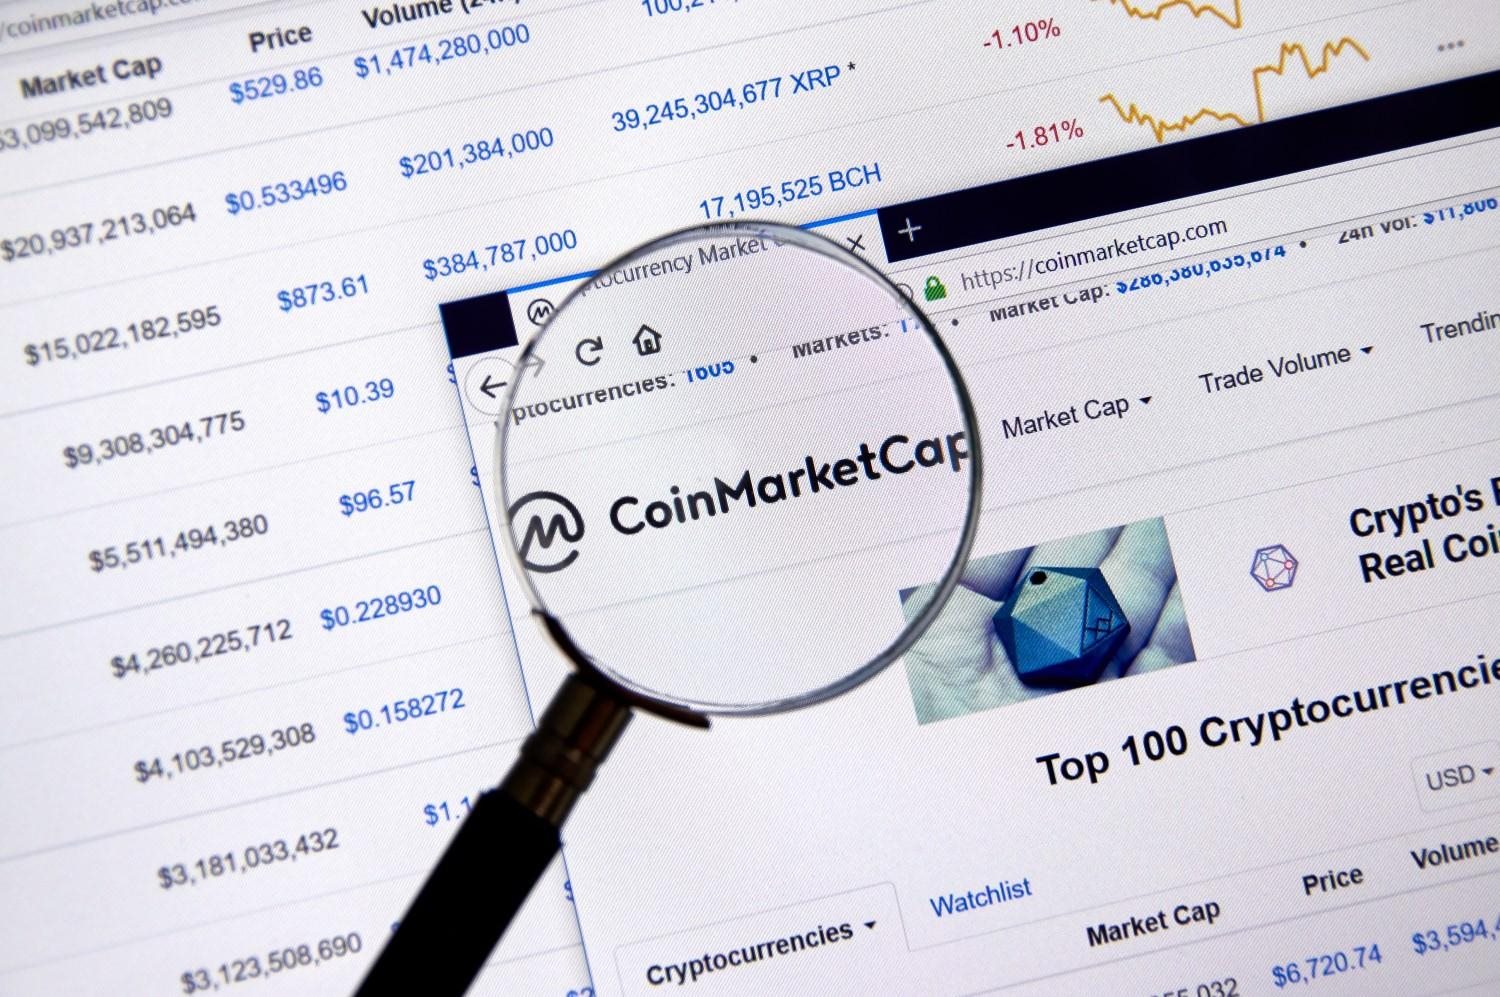 CoinMarketCap.com - Review and feedback on the service for tracking the cryptocurrency market